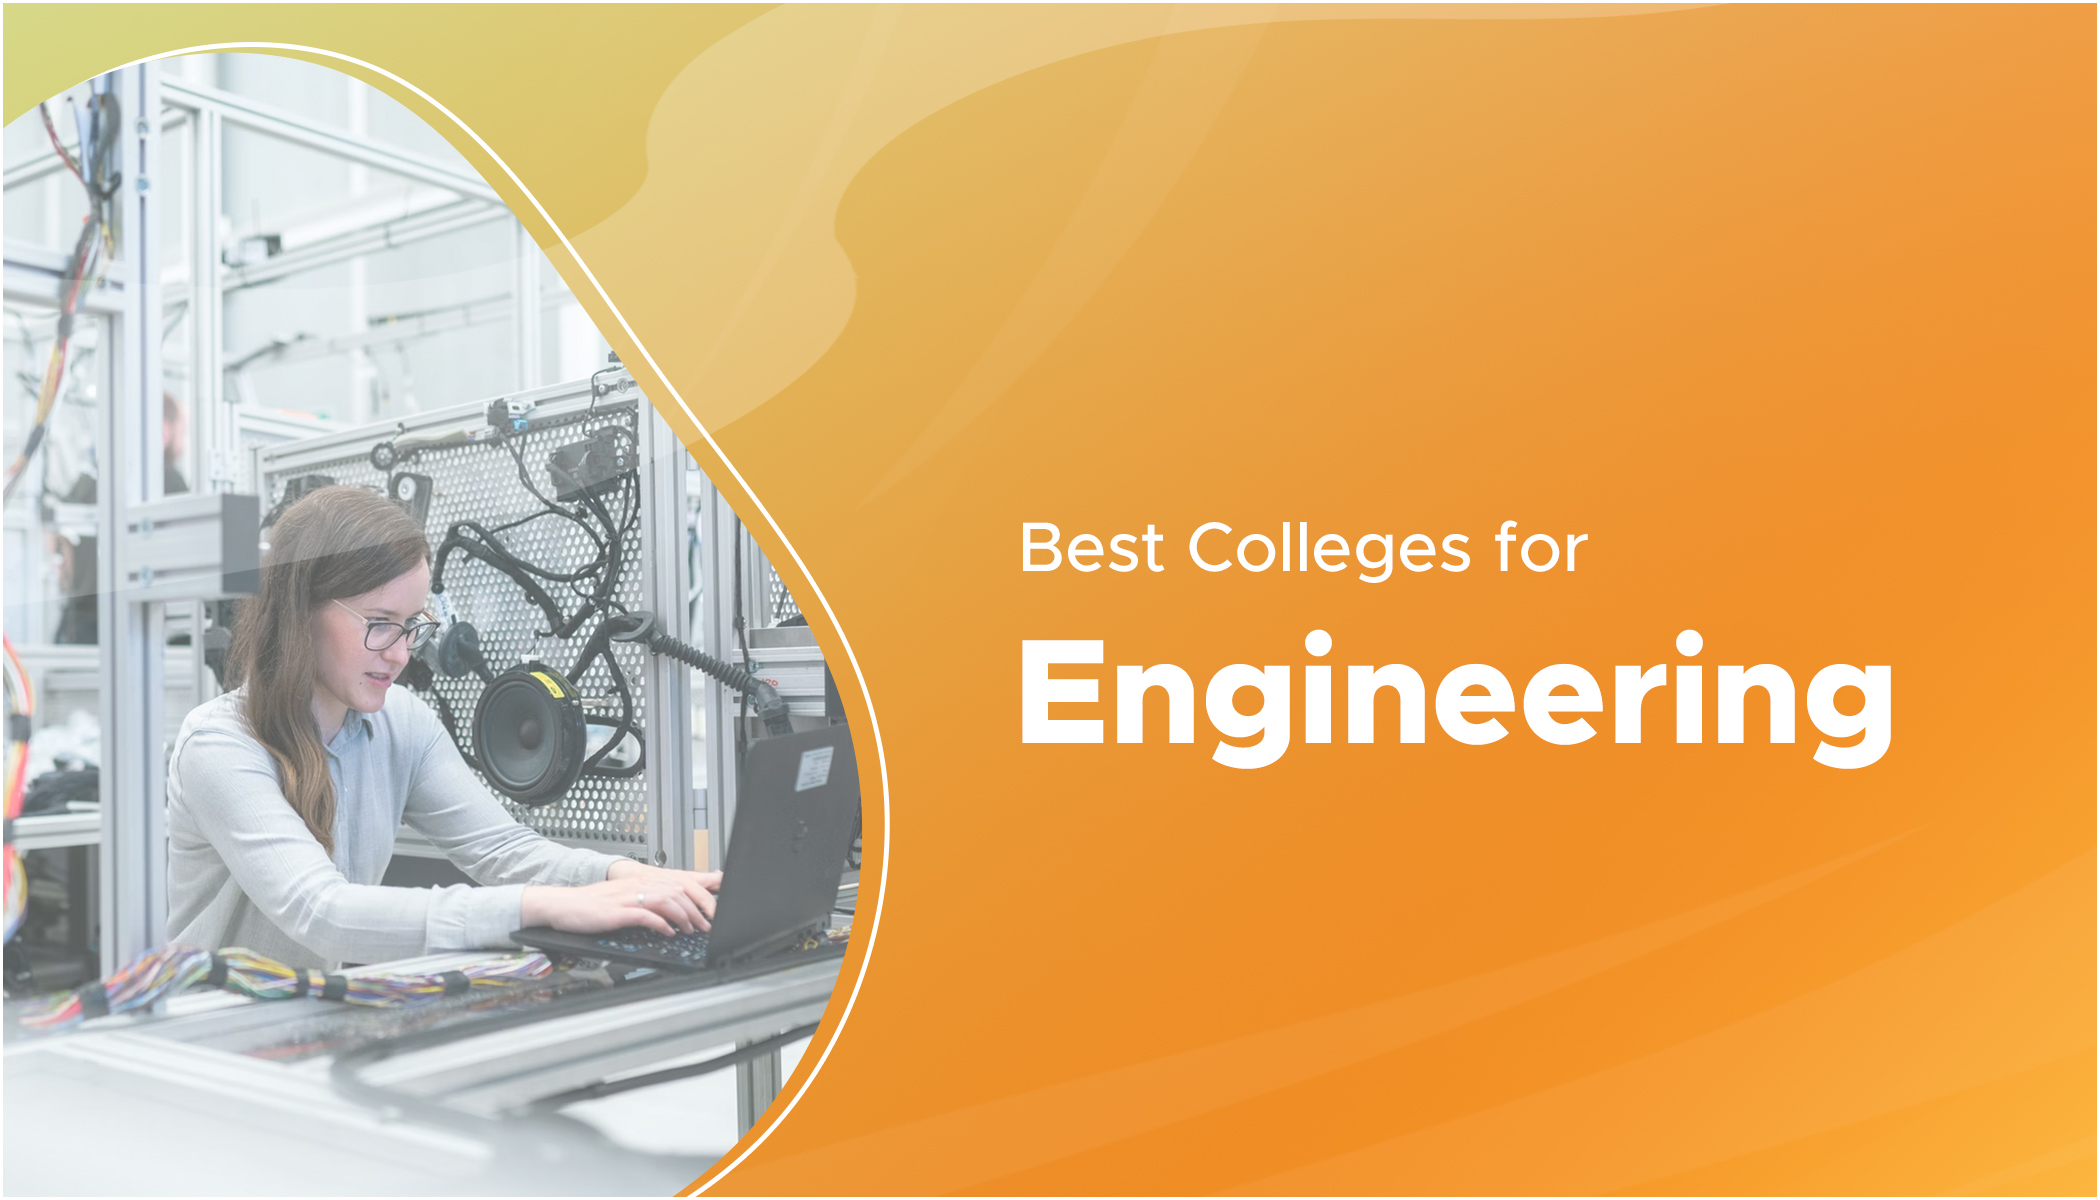 Top Engineering Colleges Best Colleges for Engineering